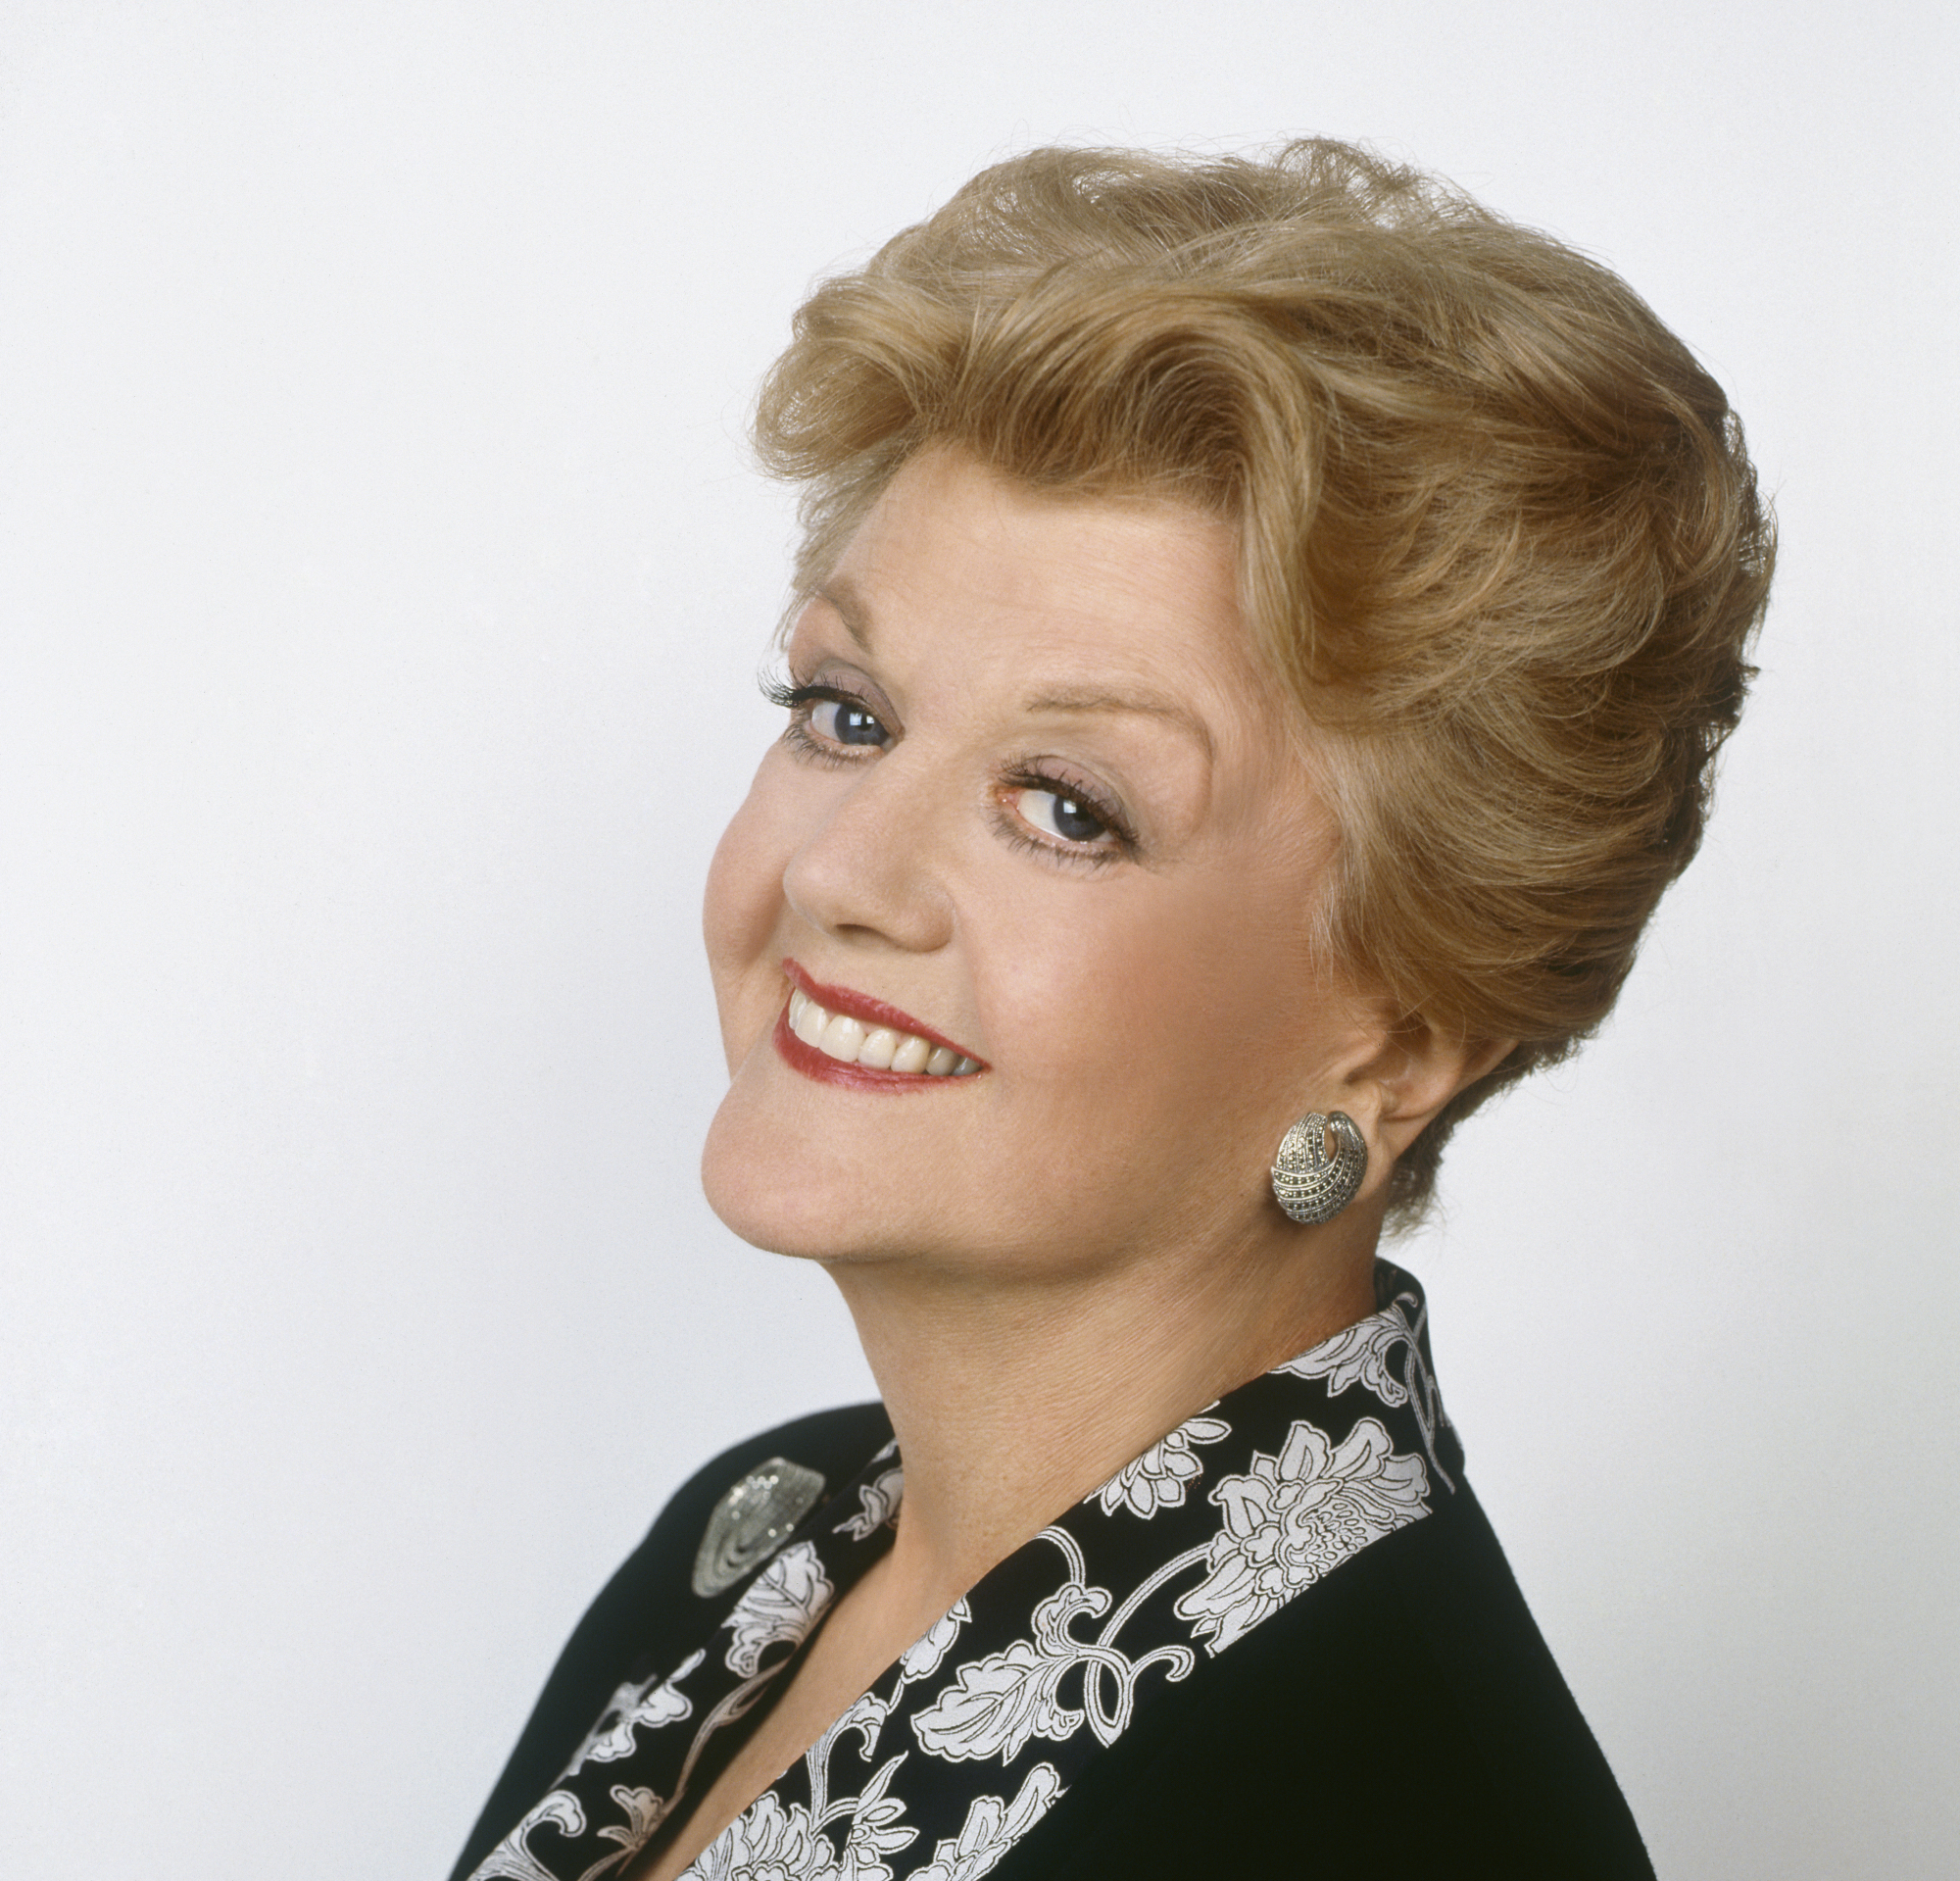 Don't let the smile fool you. Jessica Fletcher has solved more confirmed killings than any other detective, real or fictional.